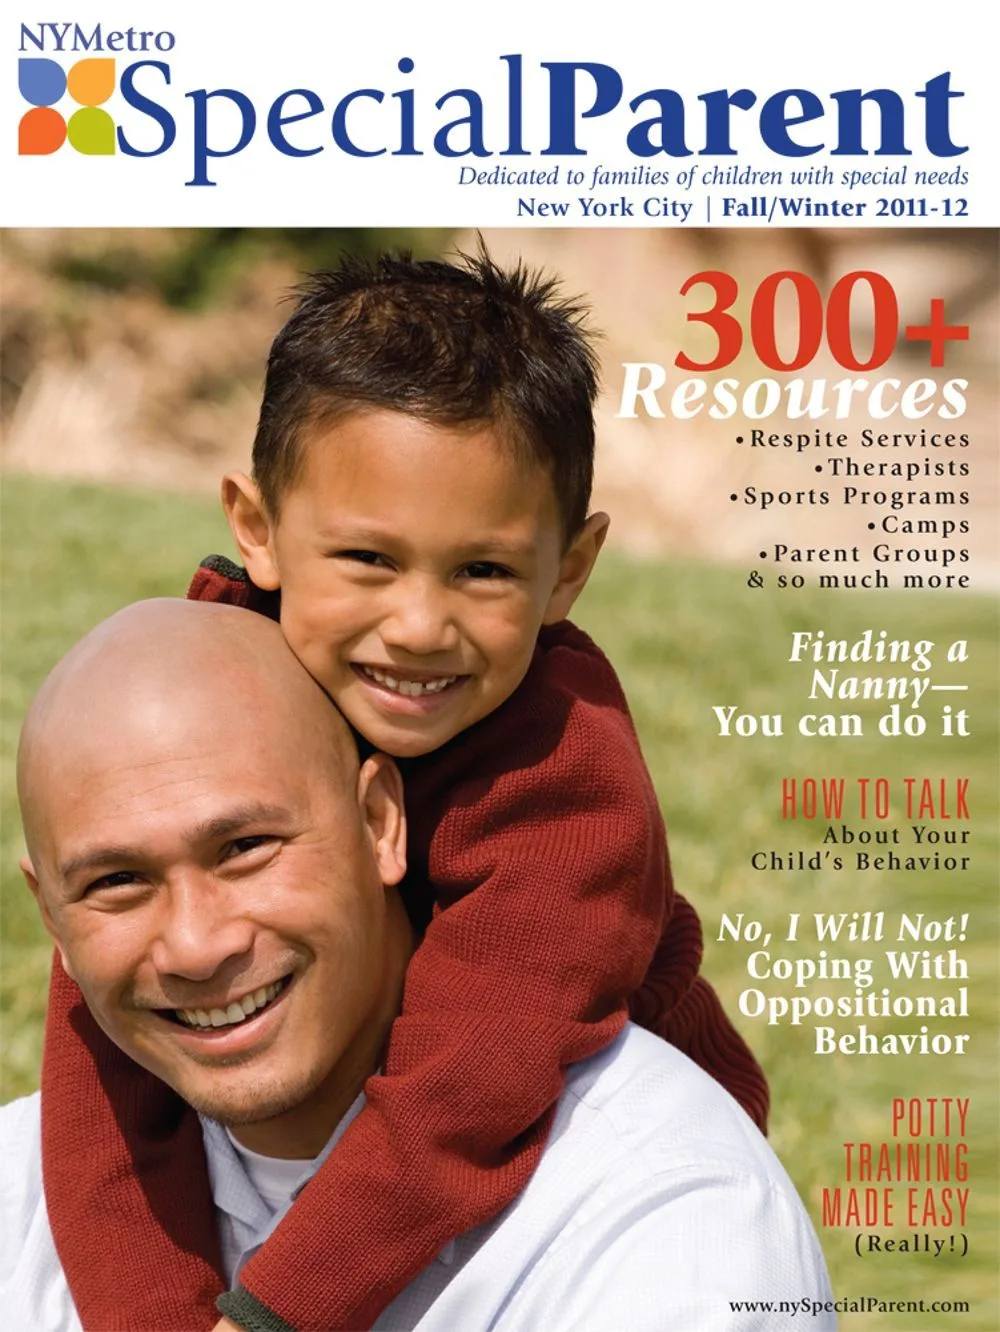 NYMetro Special Parent Fall/Winter 2011-12 issue